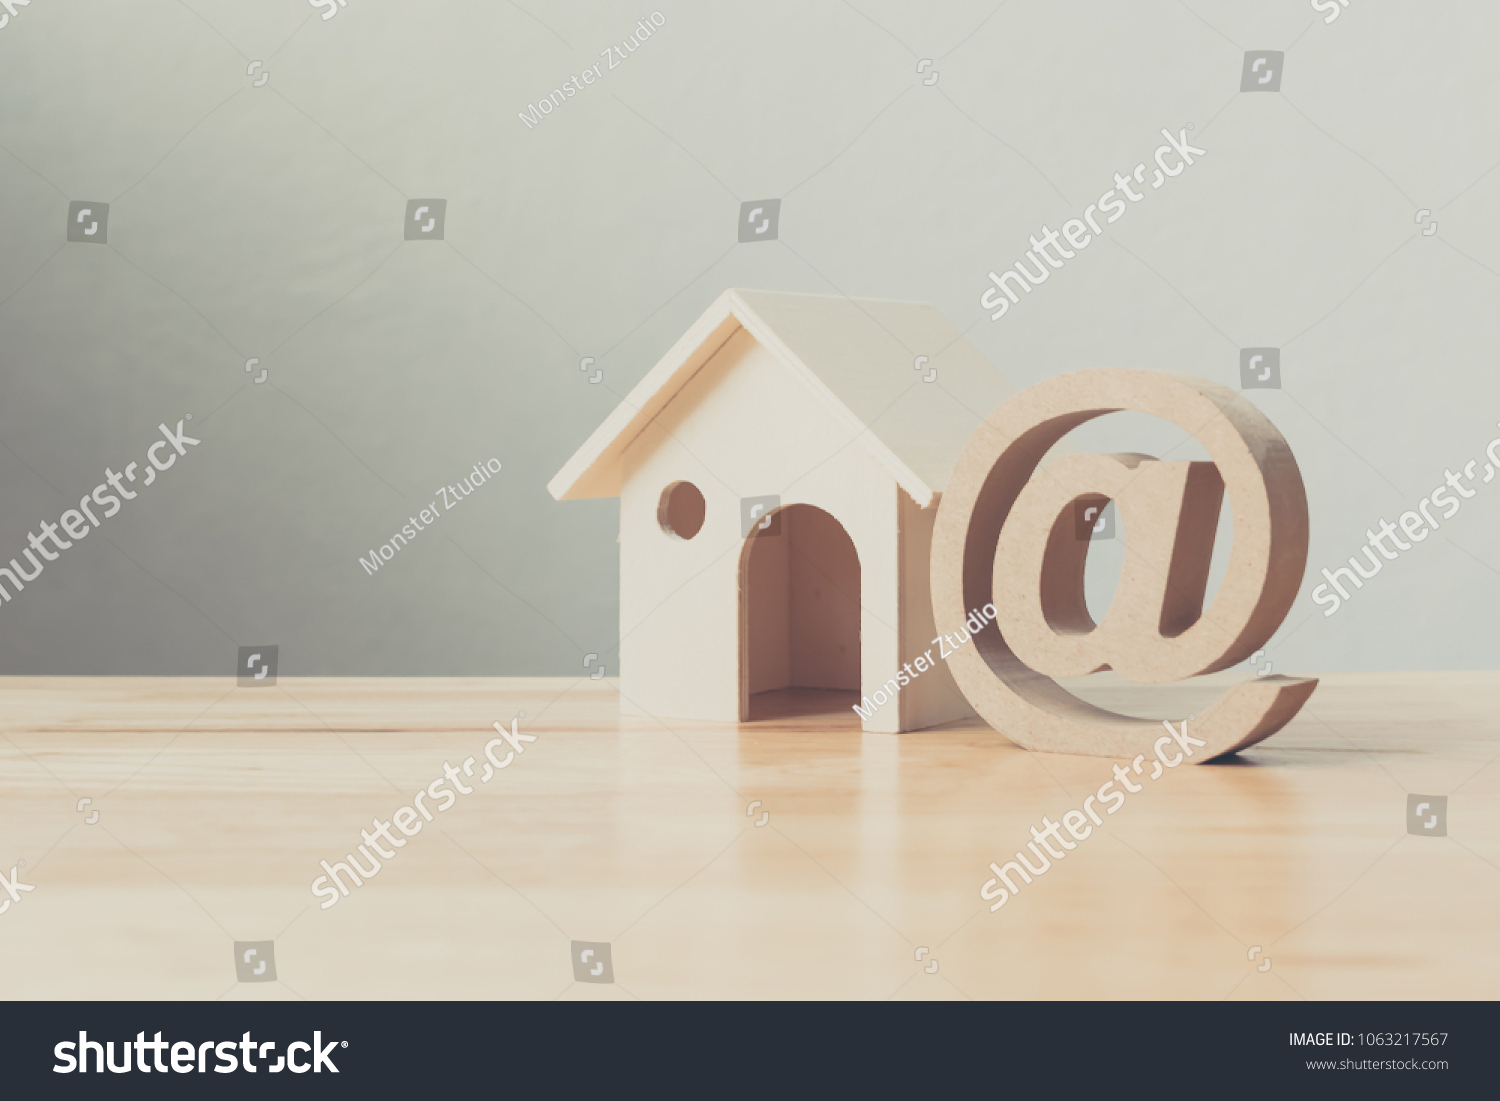 stock-photo-wooden-house-and-address-sign-on-wood-table-email-contact-us-concept-1063217567